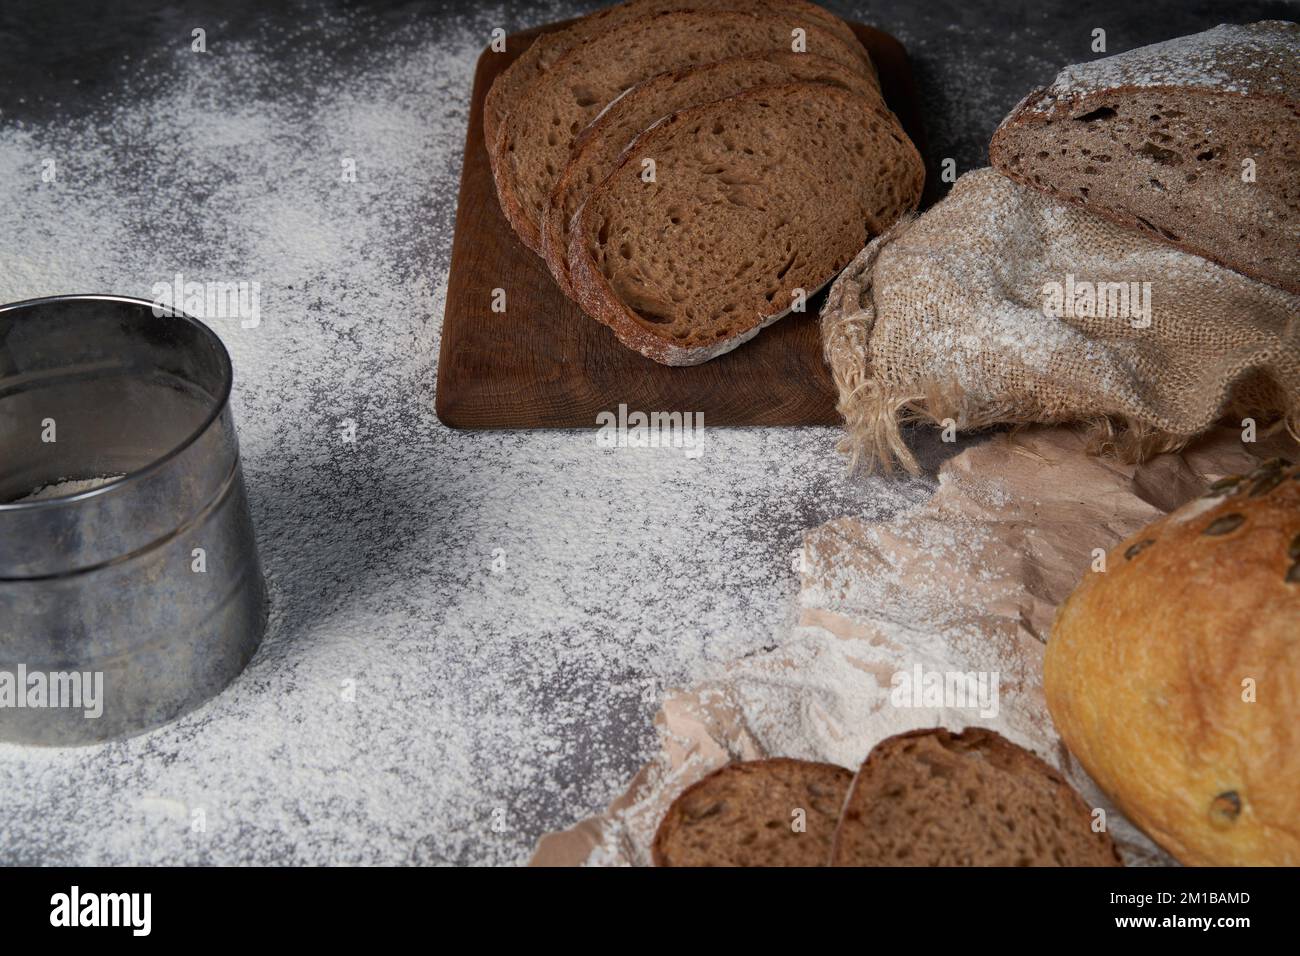 Top view of various types of bread, sliced and whole, flour, crumpled paper and burlap on a wooden table. High angle. Stock Photo